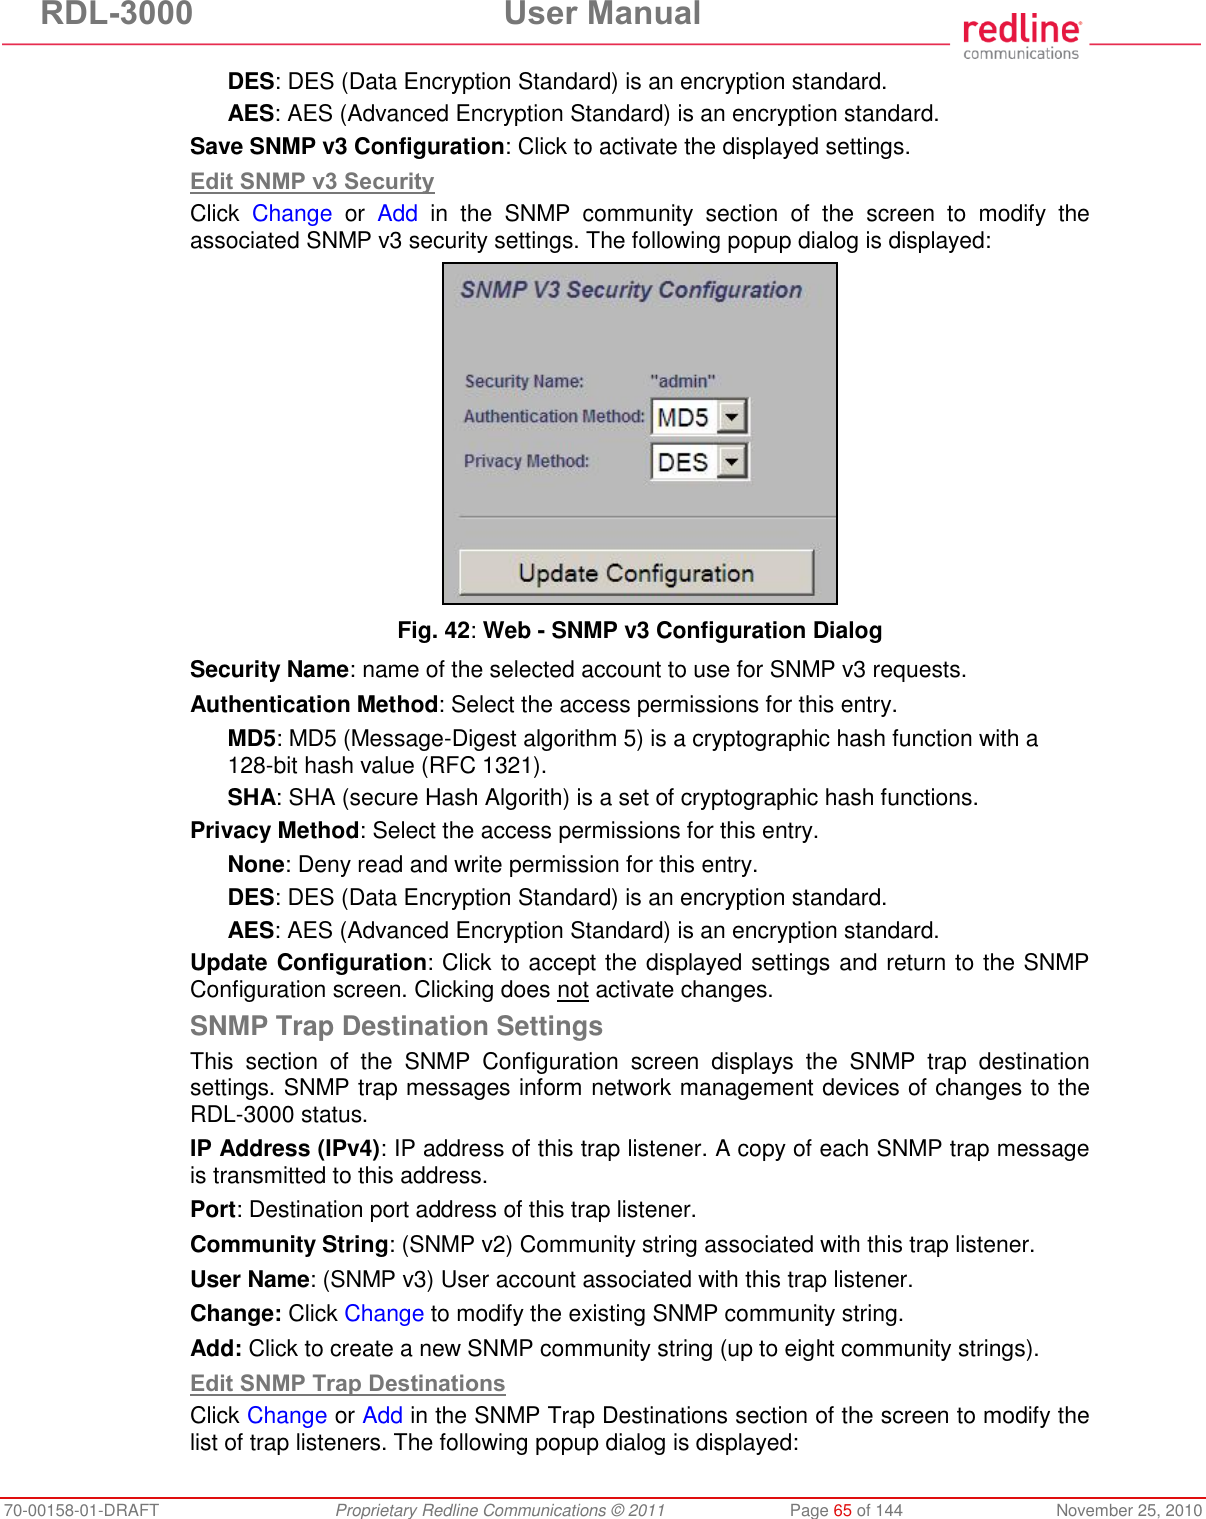 RDL-3000  User Manual 70-00158-01-DRAFT  Proprietary Redline Communications © 2011  Page 65 of 144  November 25, 2010 DES: DES (Data Encryption Standard) is an encryption standard. AES: AES (Advanced Encryption Standard) is an encryption standard. Save SNMP v3 Configuration: Click to activate the displayed settings. Edit SNMP v3 Security Click  Change  or  Add  in  the  SNMP  community  section  of  the  screen  to  modify  the associated SNMP v3 security settings. The following popup dialog is displayed:  Fig. 42: Web - SNMP v3 Configuration Dialog Security Name: name of the selected account to use for SNMP v3 requests. Authentication Method: Select the access permissions for this entry. MD5: MD5 (Message-Digest algorithm 5) is a cryptographic hash function with a 128-bit hash value (RFC 1321). SHA: SHA (secure Hash Algorith) is a set of cryptographic hash functions. Privacy Method: Select the access permissions for this entry. None: Deny read and write permission for this entry. DES: DES (Data Encryption Standard) is an encryption standard. AES: AES (Advanced Encryption Standard) is an encryption standard. Update Configuration: Click to accept the displayed settings and return to the SNMP Configuration screen. Clicking does not activate changes. SNMP Trap Destination Settings This  section  of  the  SNMP  Configuration  screen  displays  the  SNMP  trap  destination settings. SNMP trap messages inform network management devices of changes to the RDL-3000 status. IP Address (IPv4): IP address of this trap listener. A copy of each SNMP trap message is transmitted to this address. Port: Destination port address of this trap listener. Community String: (SNMP v2) Community string associated with this trap listener. User Name: (SNMP v3) User account associated with this trap listener. Change: Click Change to modify the existing SNMP community string. Add: Click to create a new SNMP community string (up to eight community strings). Edit SNMP Trap Destinations Click Change or Add in the SNMP Trap Destinations section of the screen to modify the list of trap listeners. The following popup dialog is displayed: 